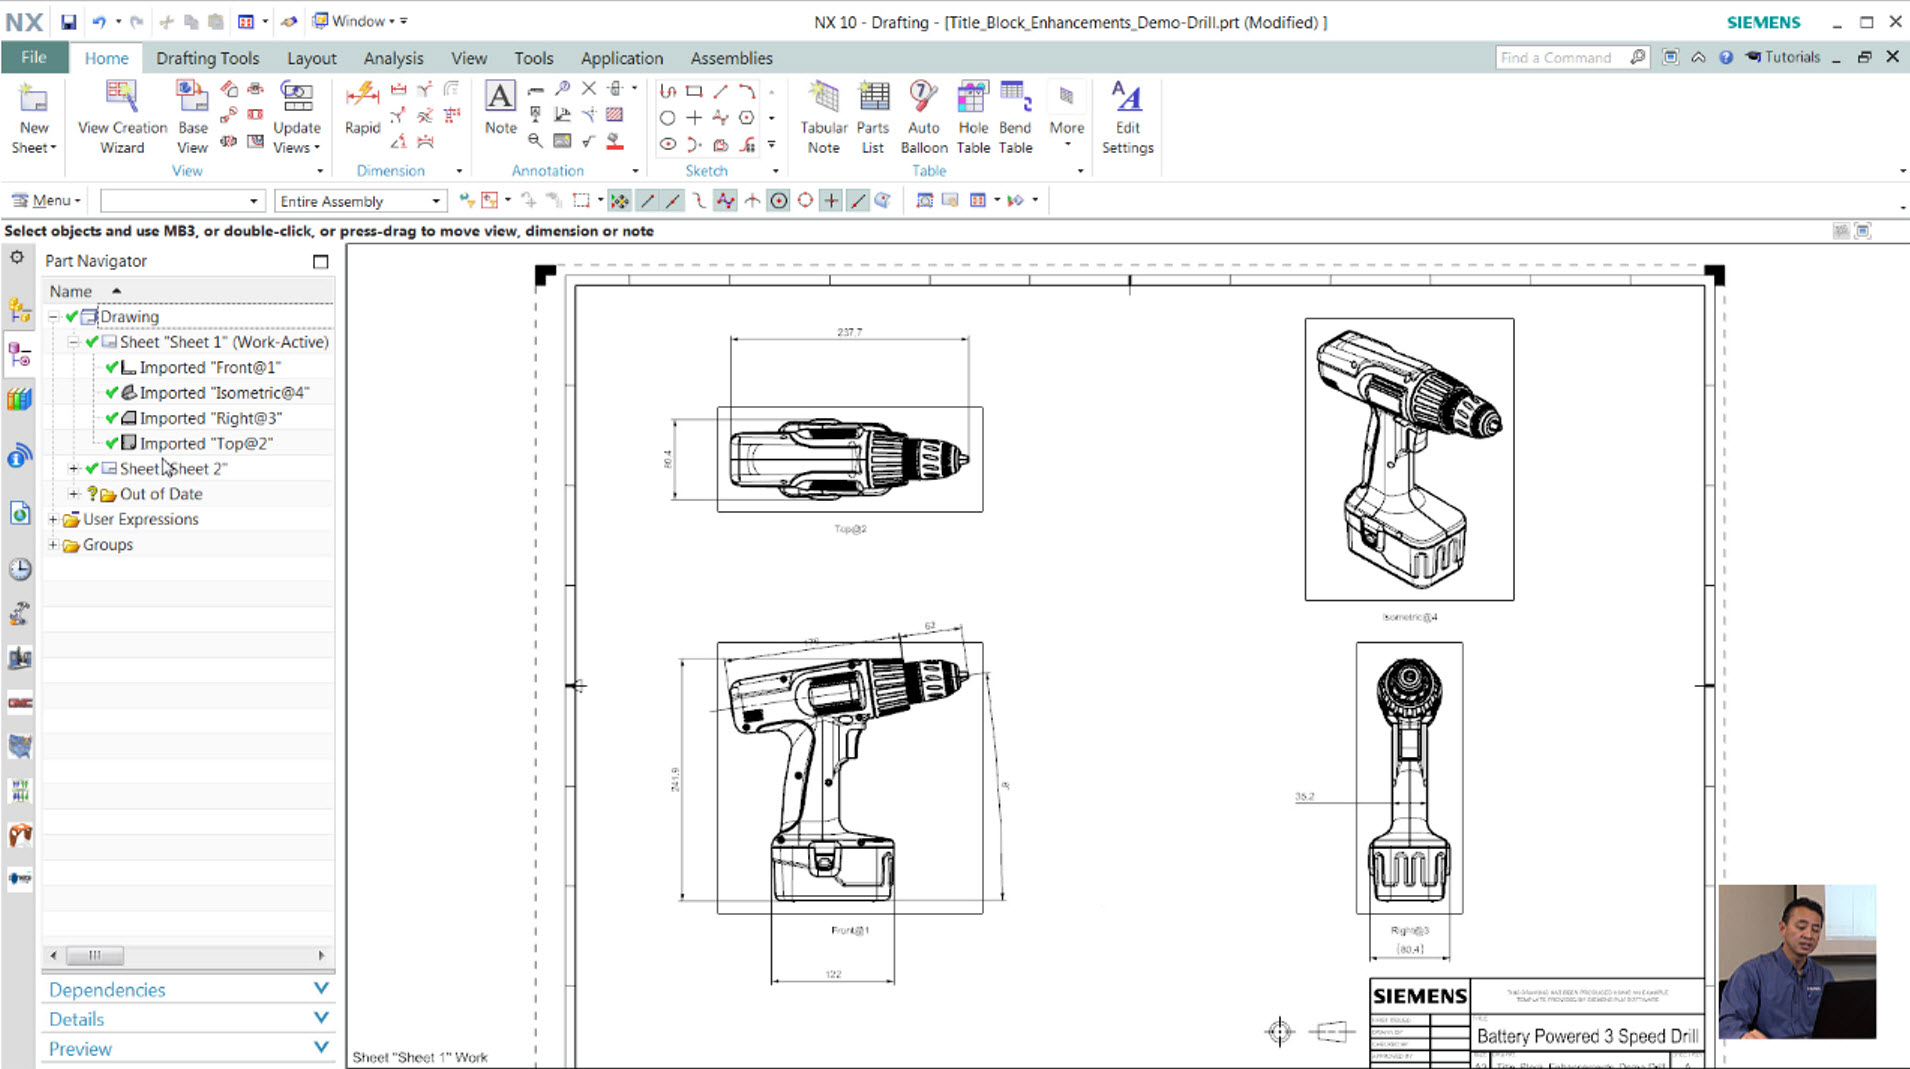 How to create a custom drafting template in NX